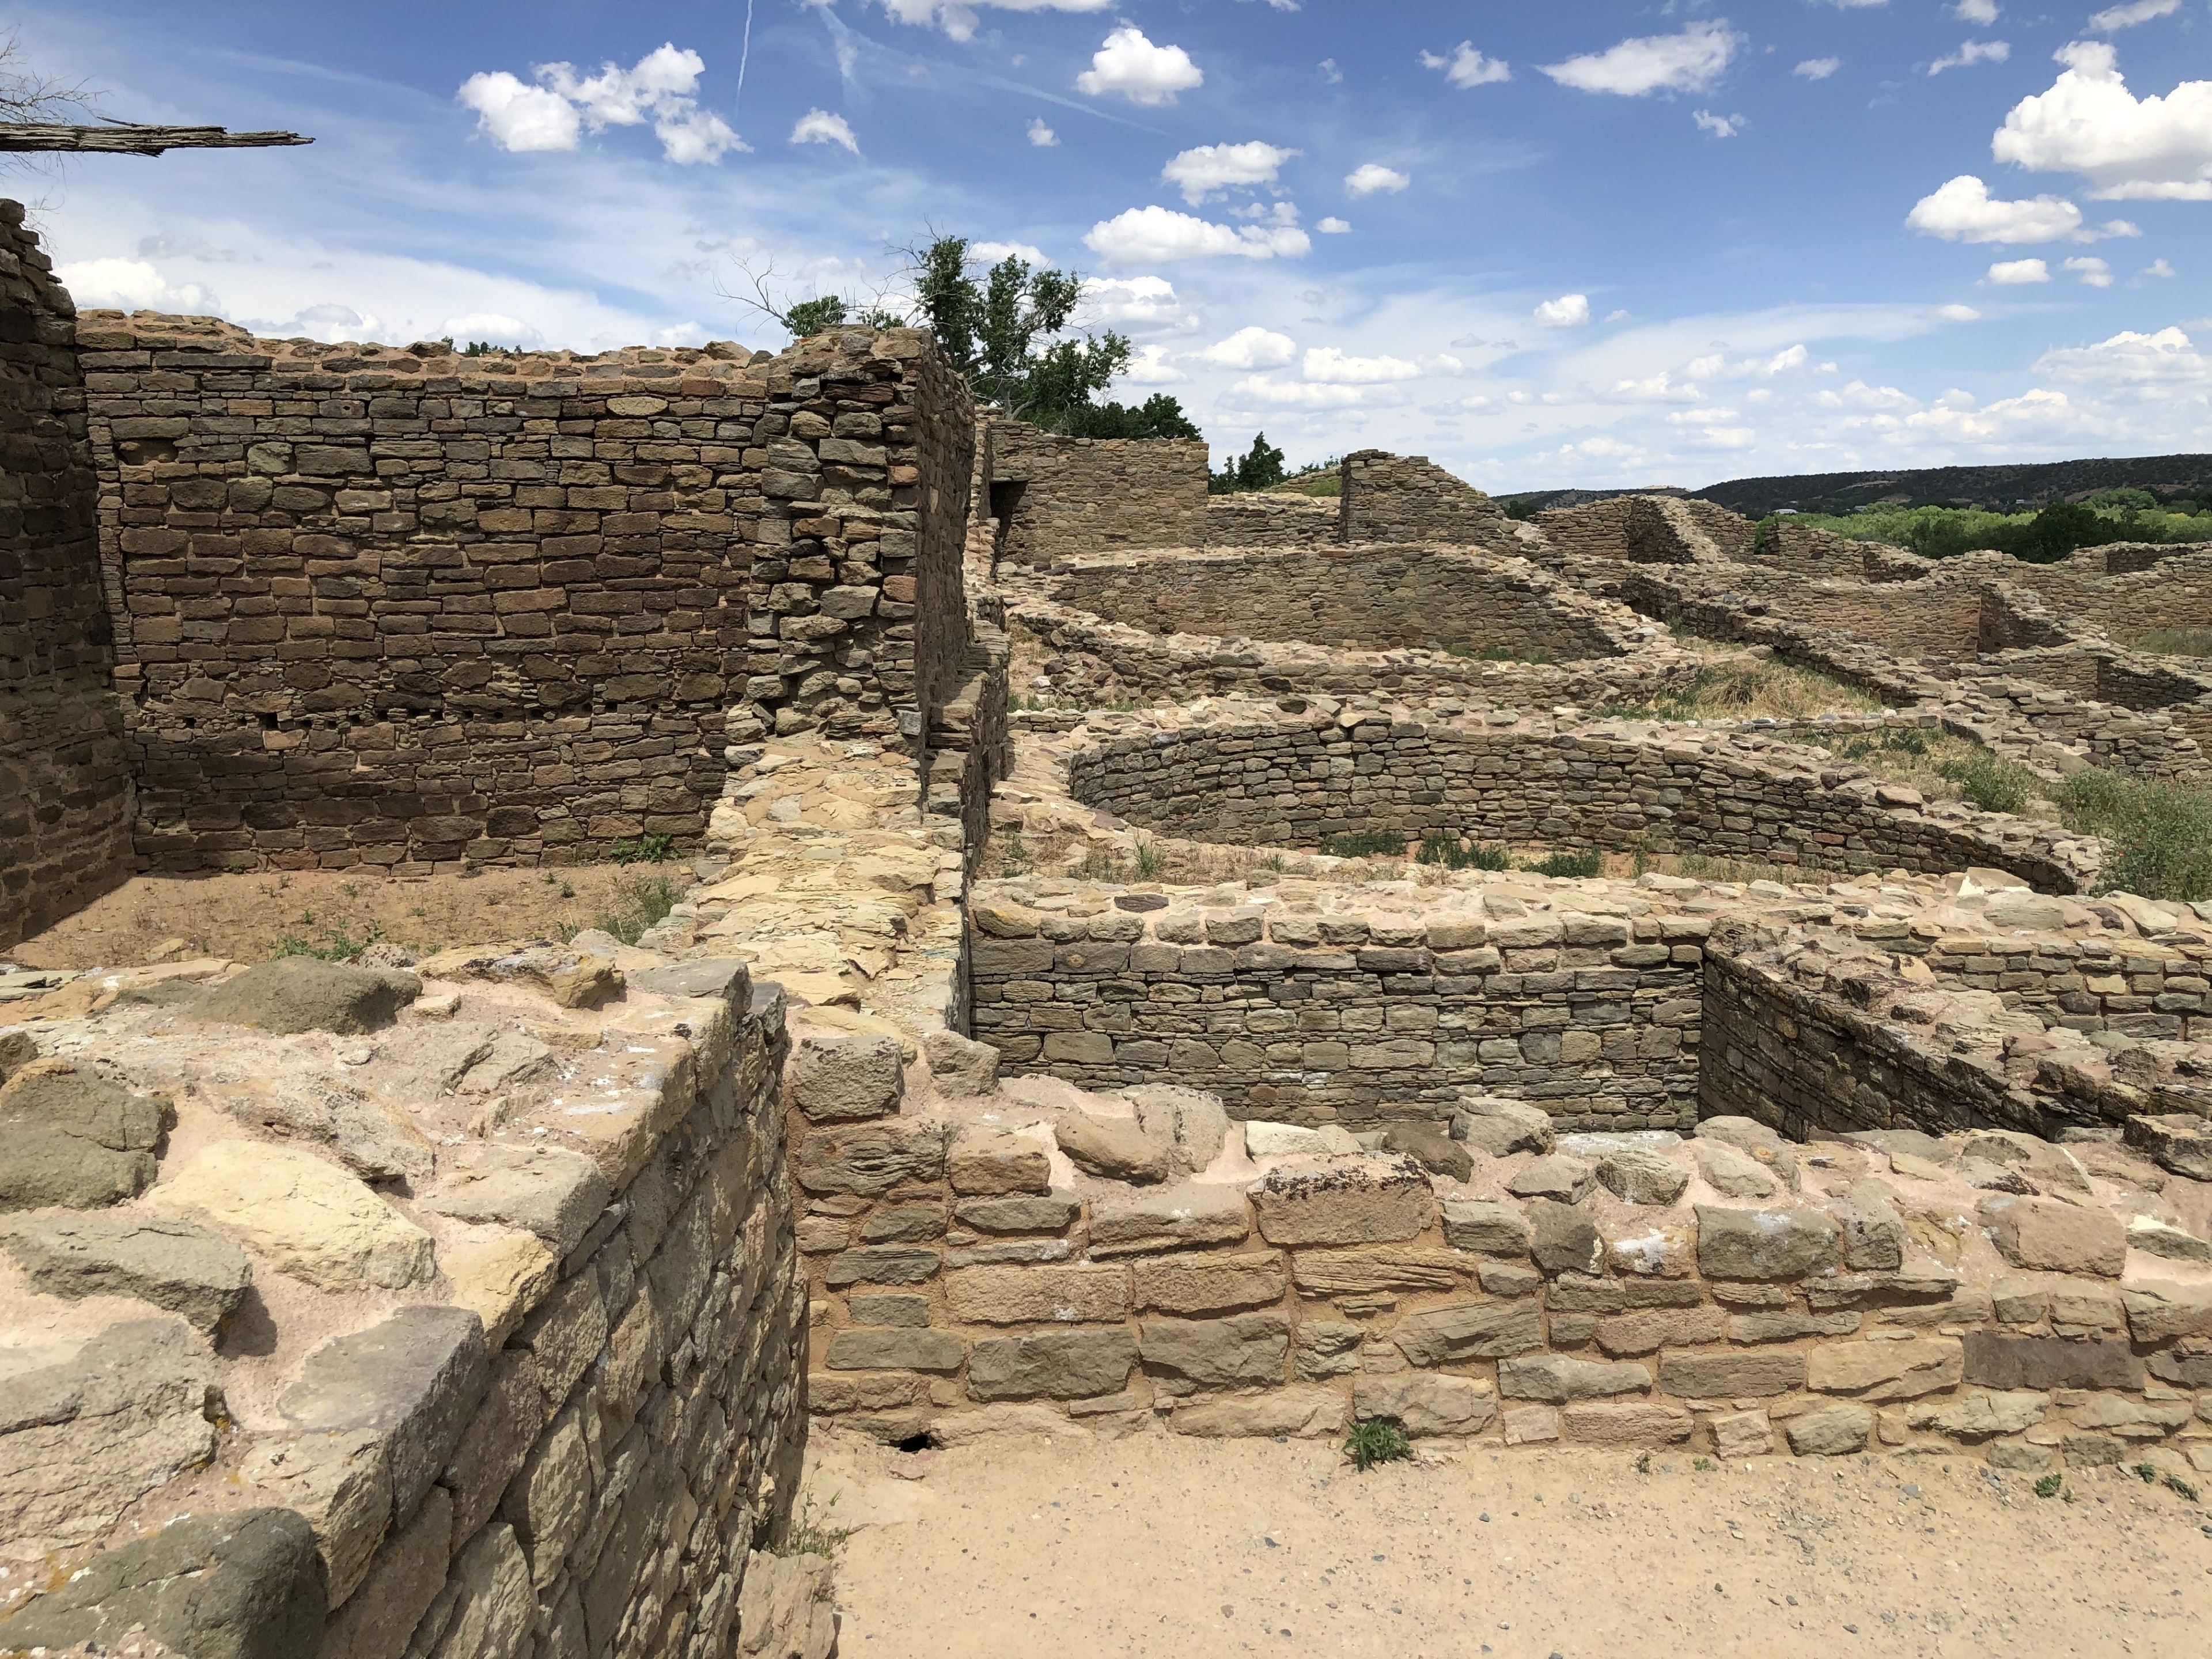 Amazing Pueblo development that was built around 1100 AD and took about 30 years to build. Over 500 rooms and as much 4 stories high, some of stoneworks were restored in early 1930’s.